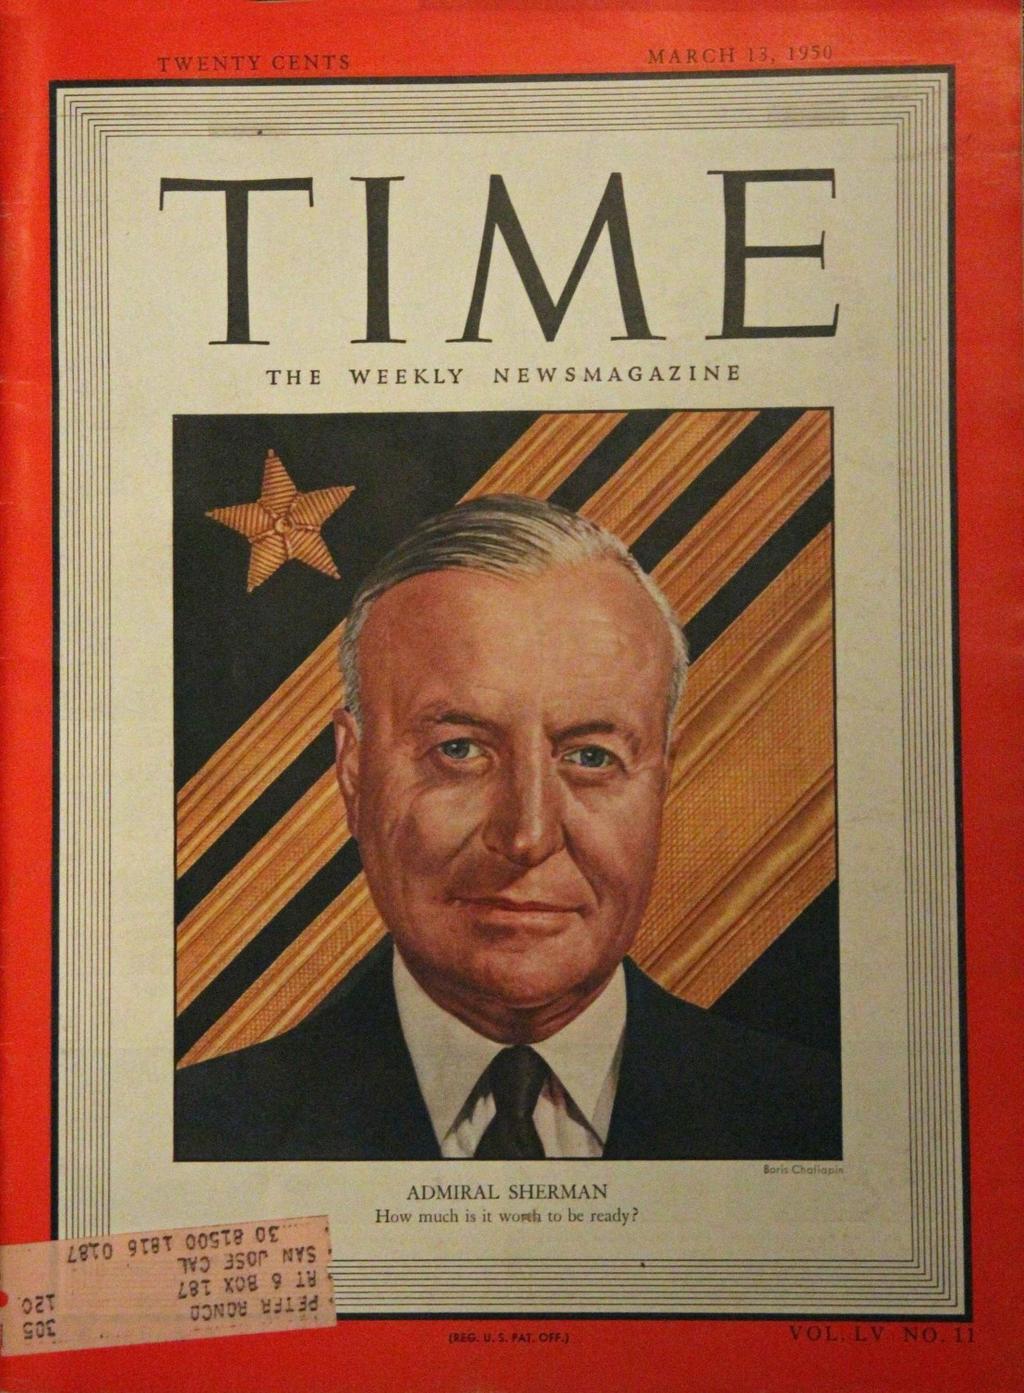 The cover of TIME magazine for March 13, 1950